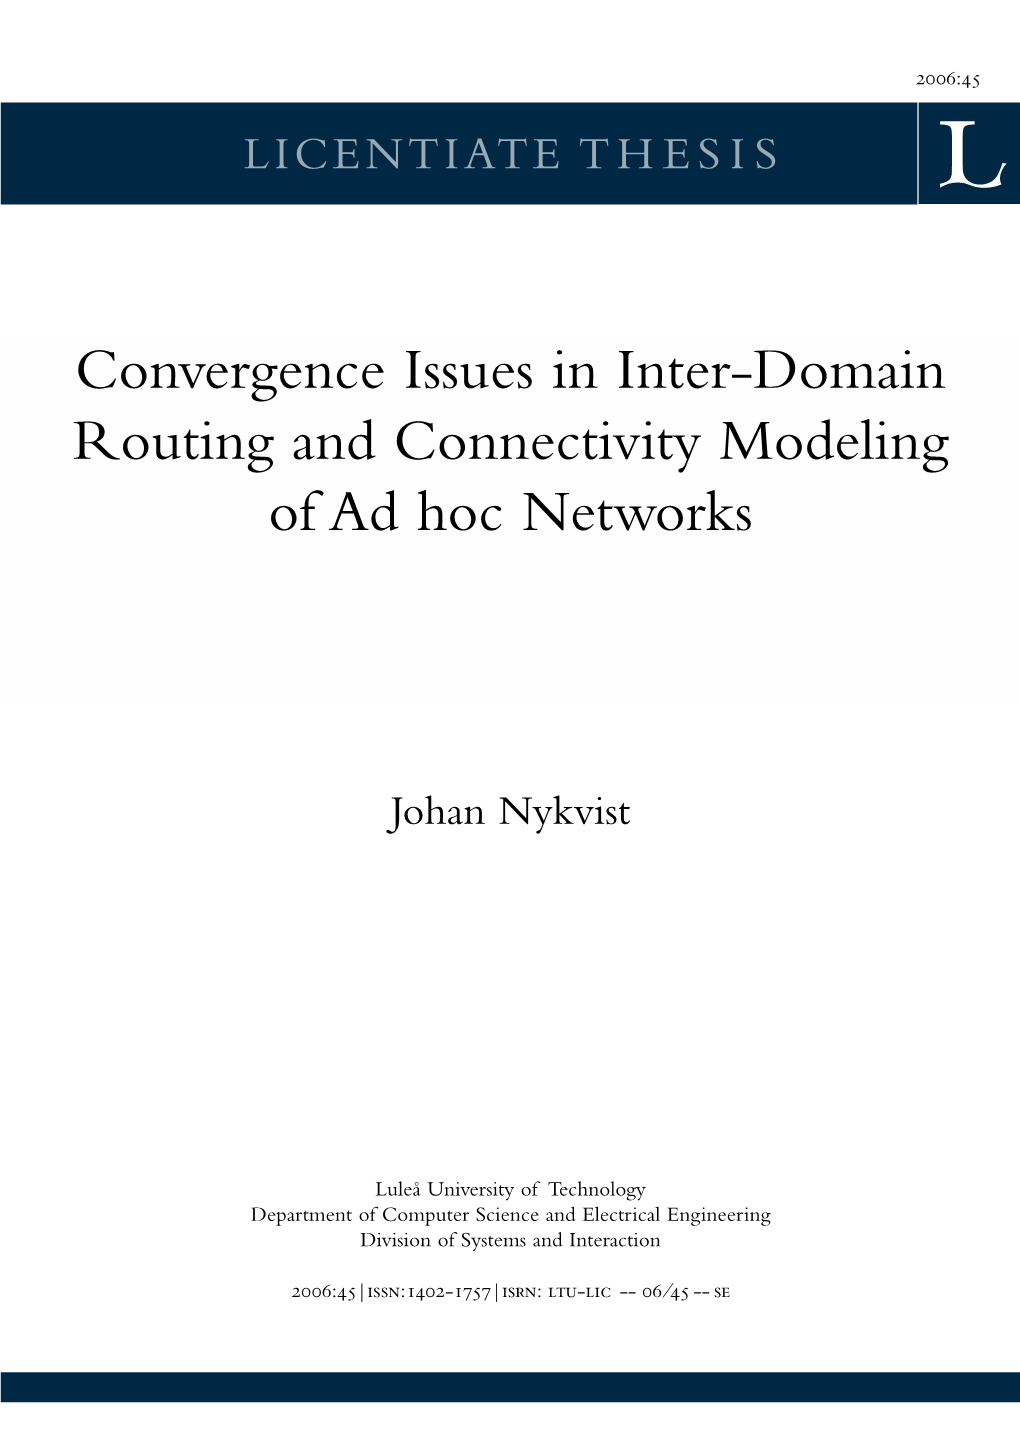 Convergence Issues in Inter-Domain Routing and Connectivity Modeling of Ad Hoc Networks